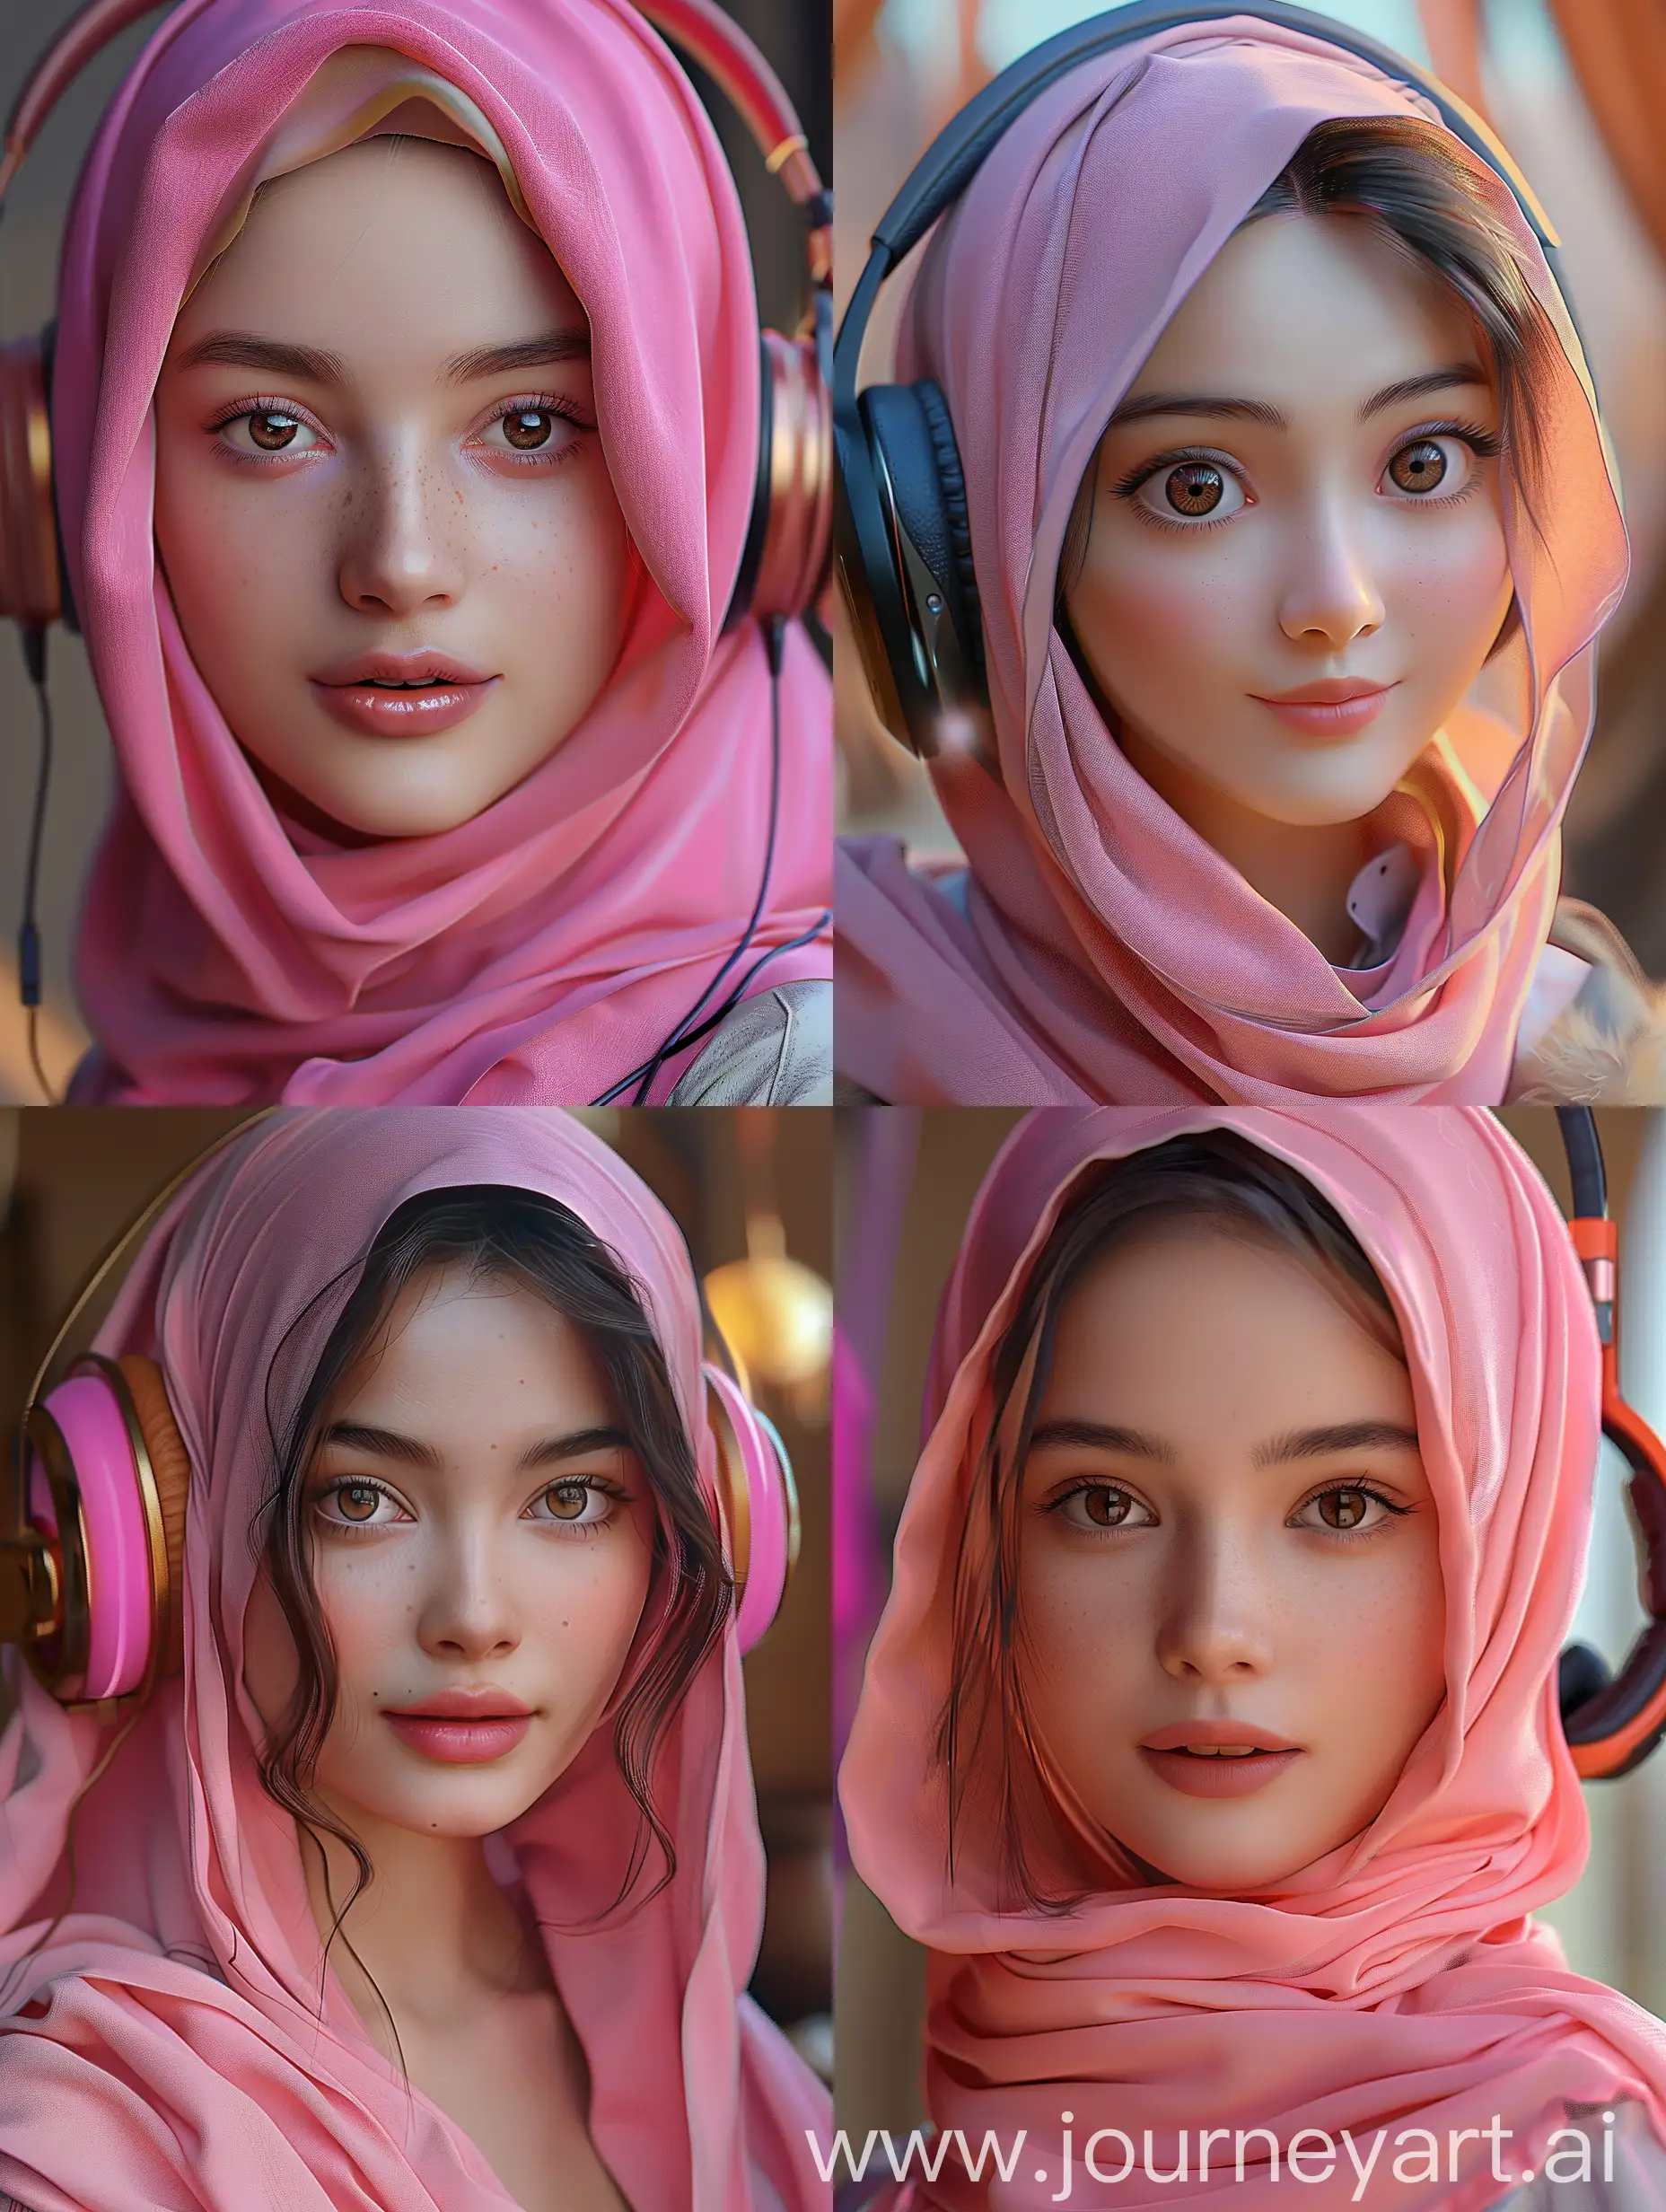 [ https://i.imgur.com/ySVpTGU.jpeg ] Make an image that is exactly the same as this example. Please render in typical Disney pixar style, wear pink hijab, smiling into camera, sharp focus and detailed, 8k, hyper realistic, natural lighting, minimalist background. --s 750